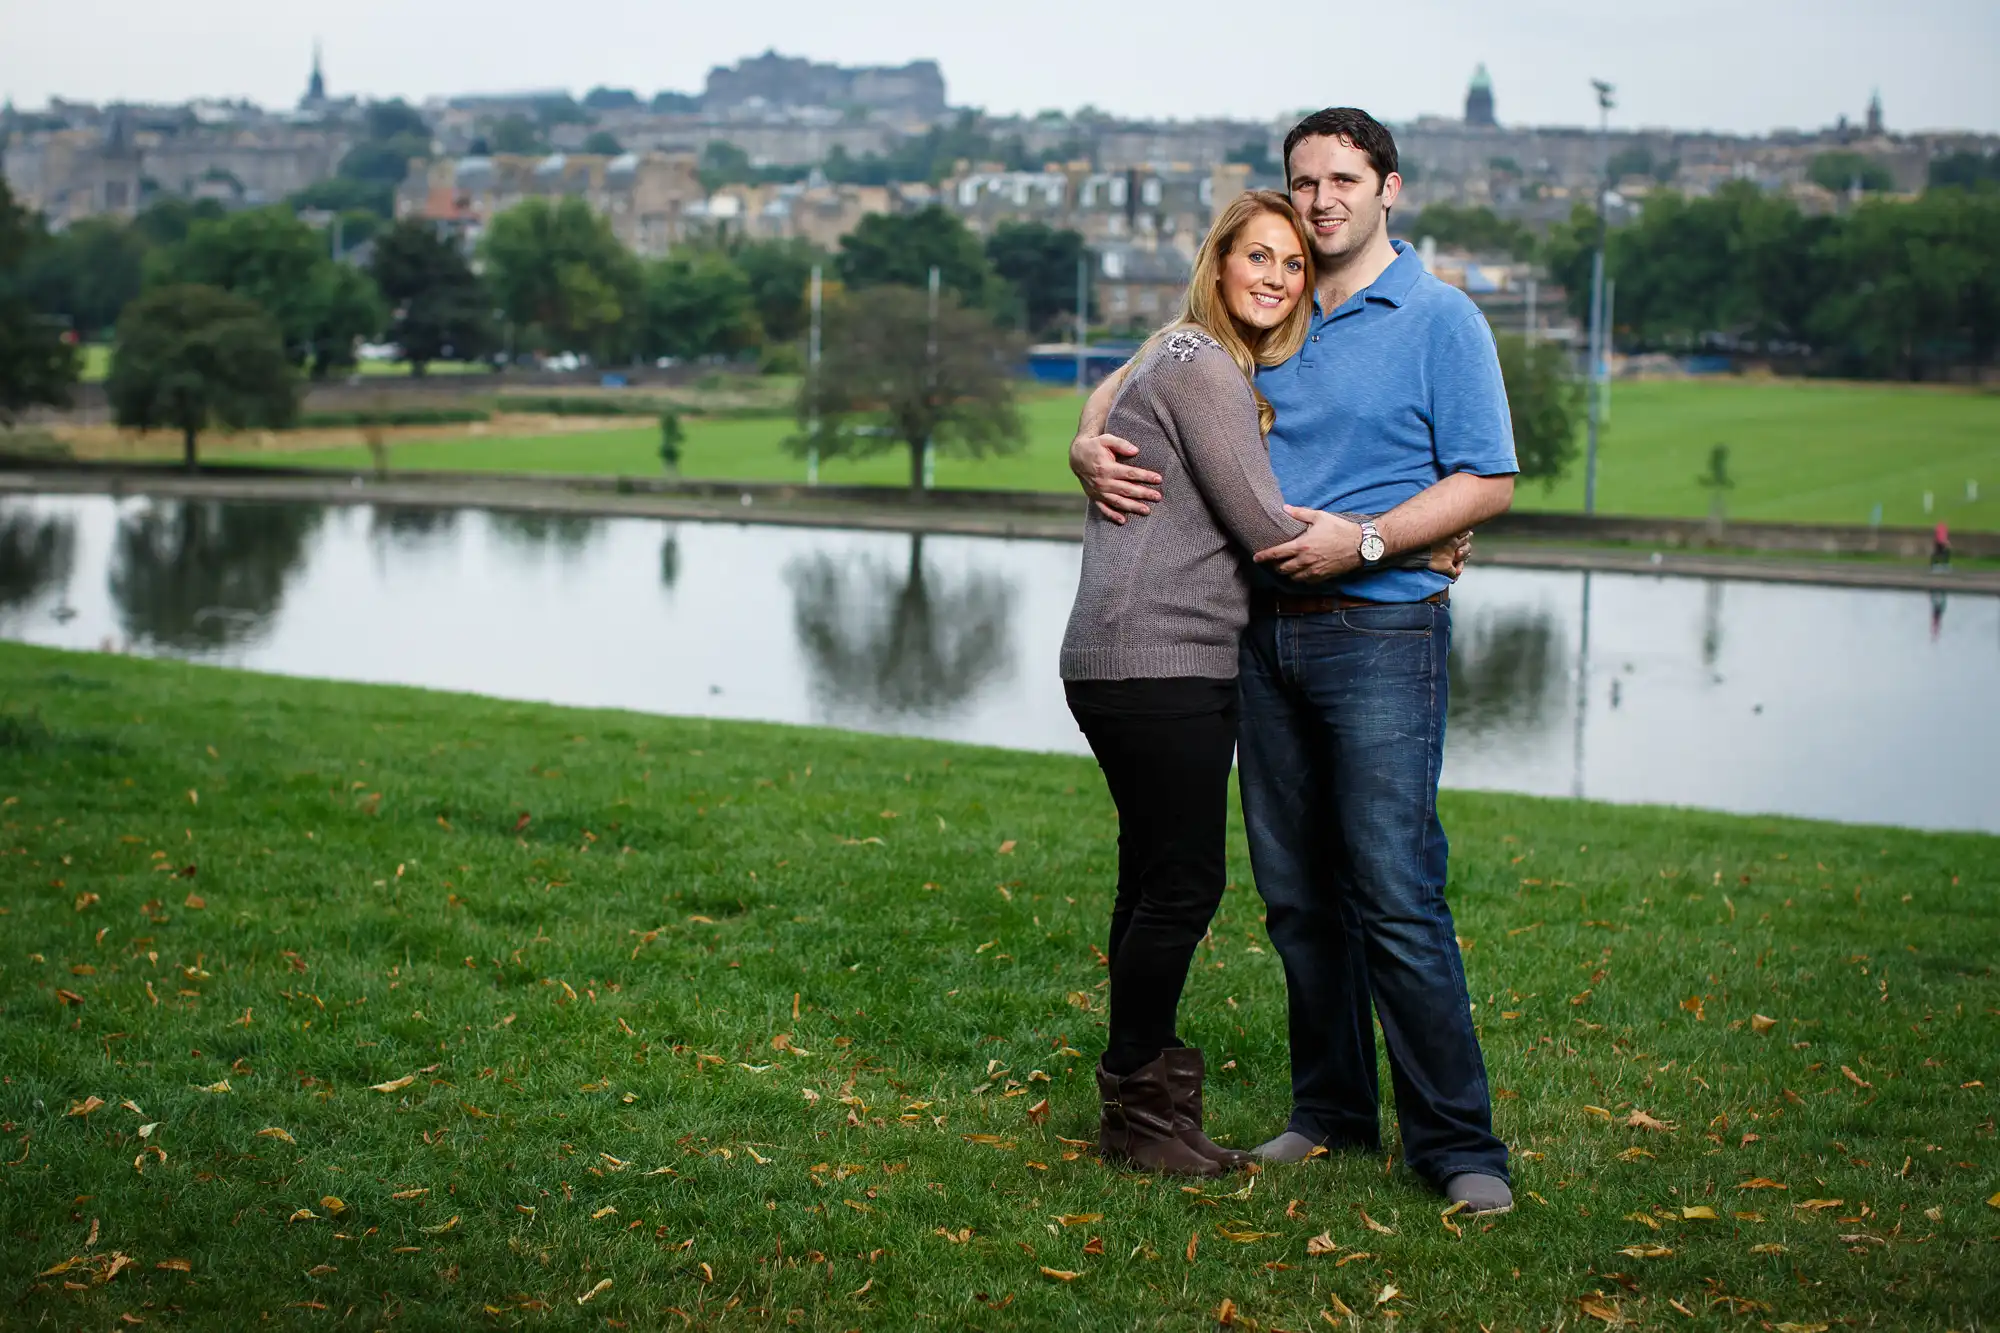 A couple embracing outdoors on a grassy hill, overlooking a cityscape and river in the background.